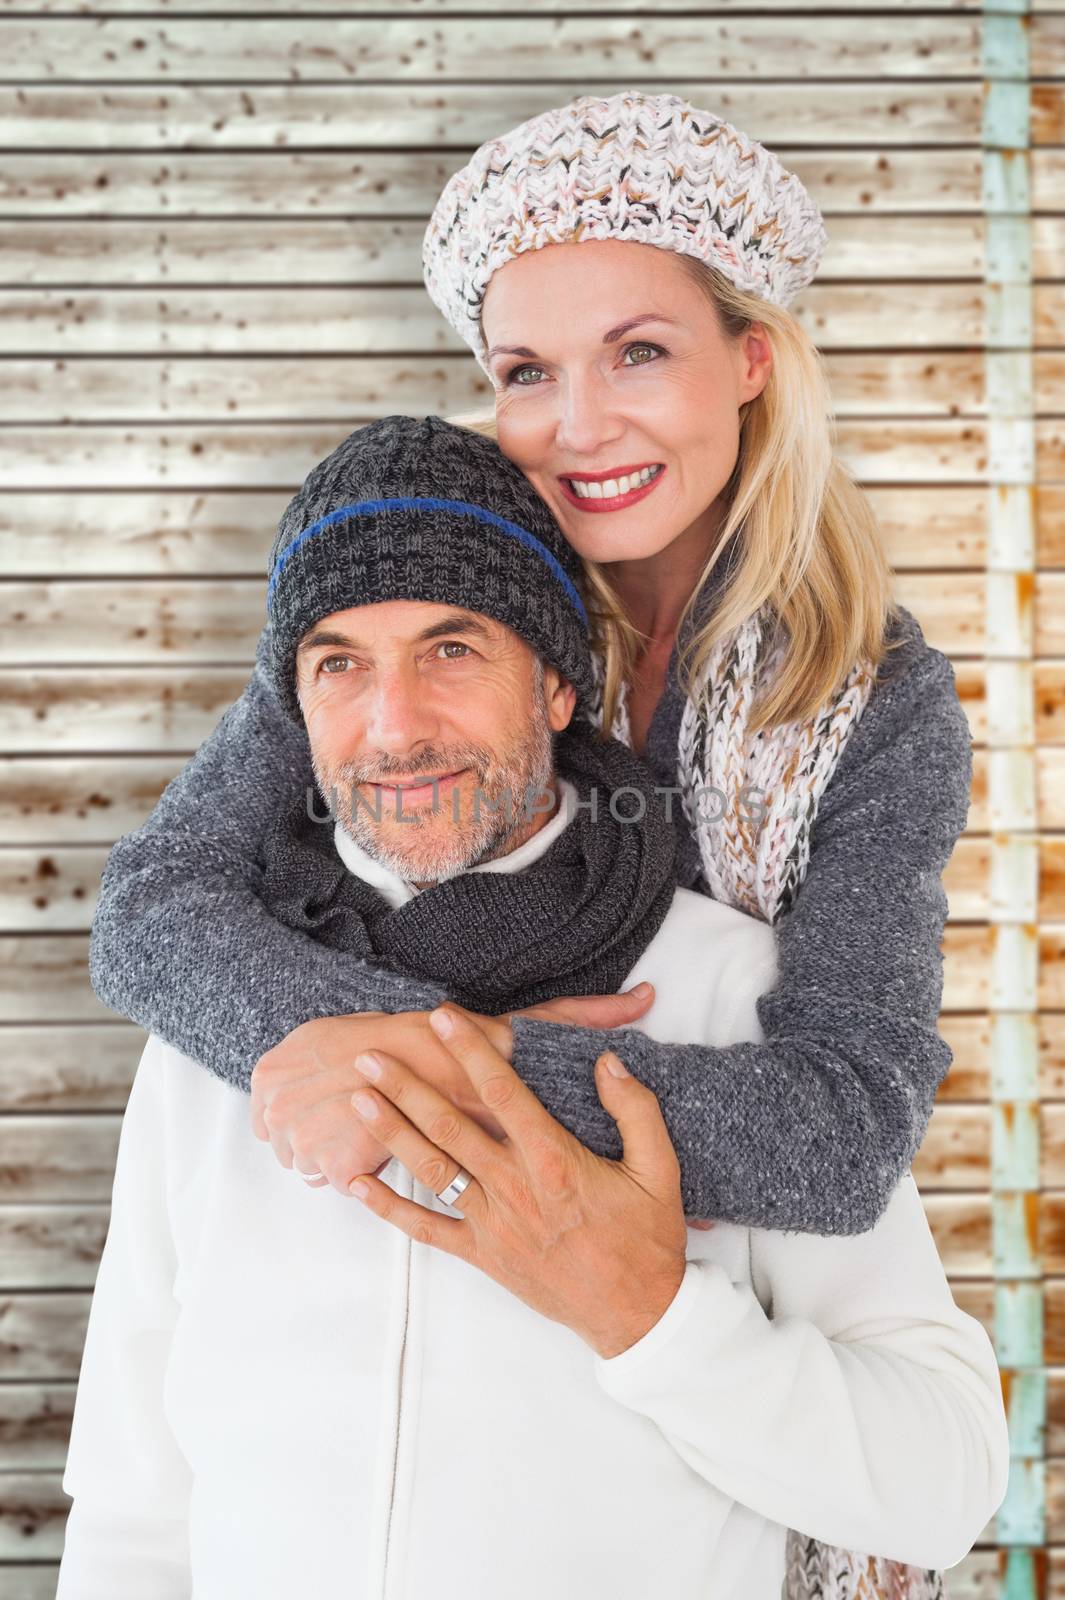 Happy couple in winter fashion embracing against faded pine wooden planks